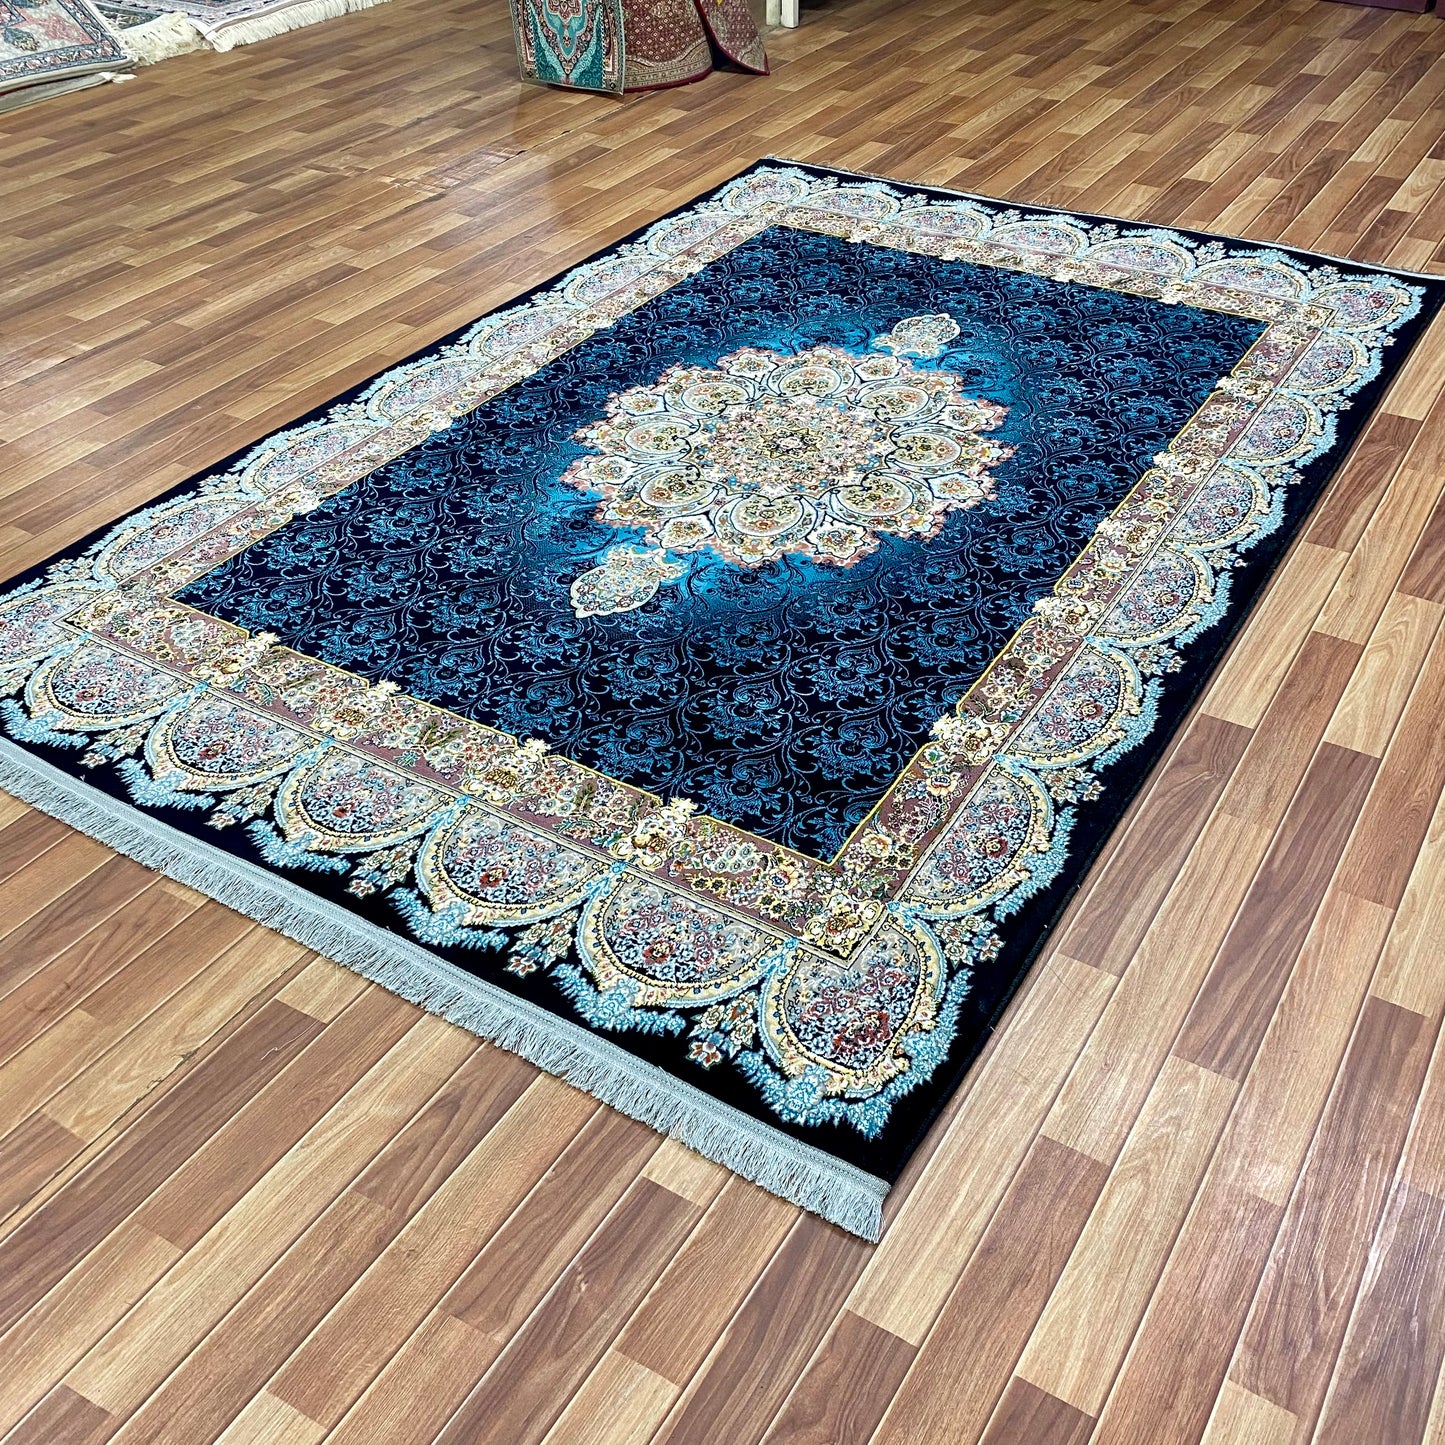 7 ft x 10 ft - Area Rug - 700 Reeds - Farsh e Modern 2 - Black and Blue - Superior Comfort Elegant and Luxury Style Accent